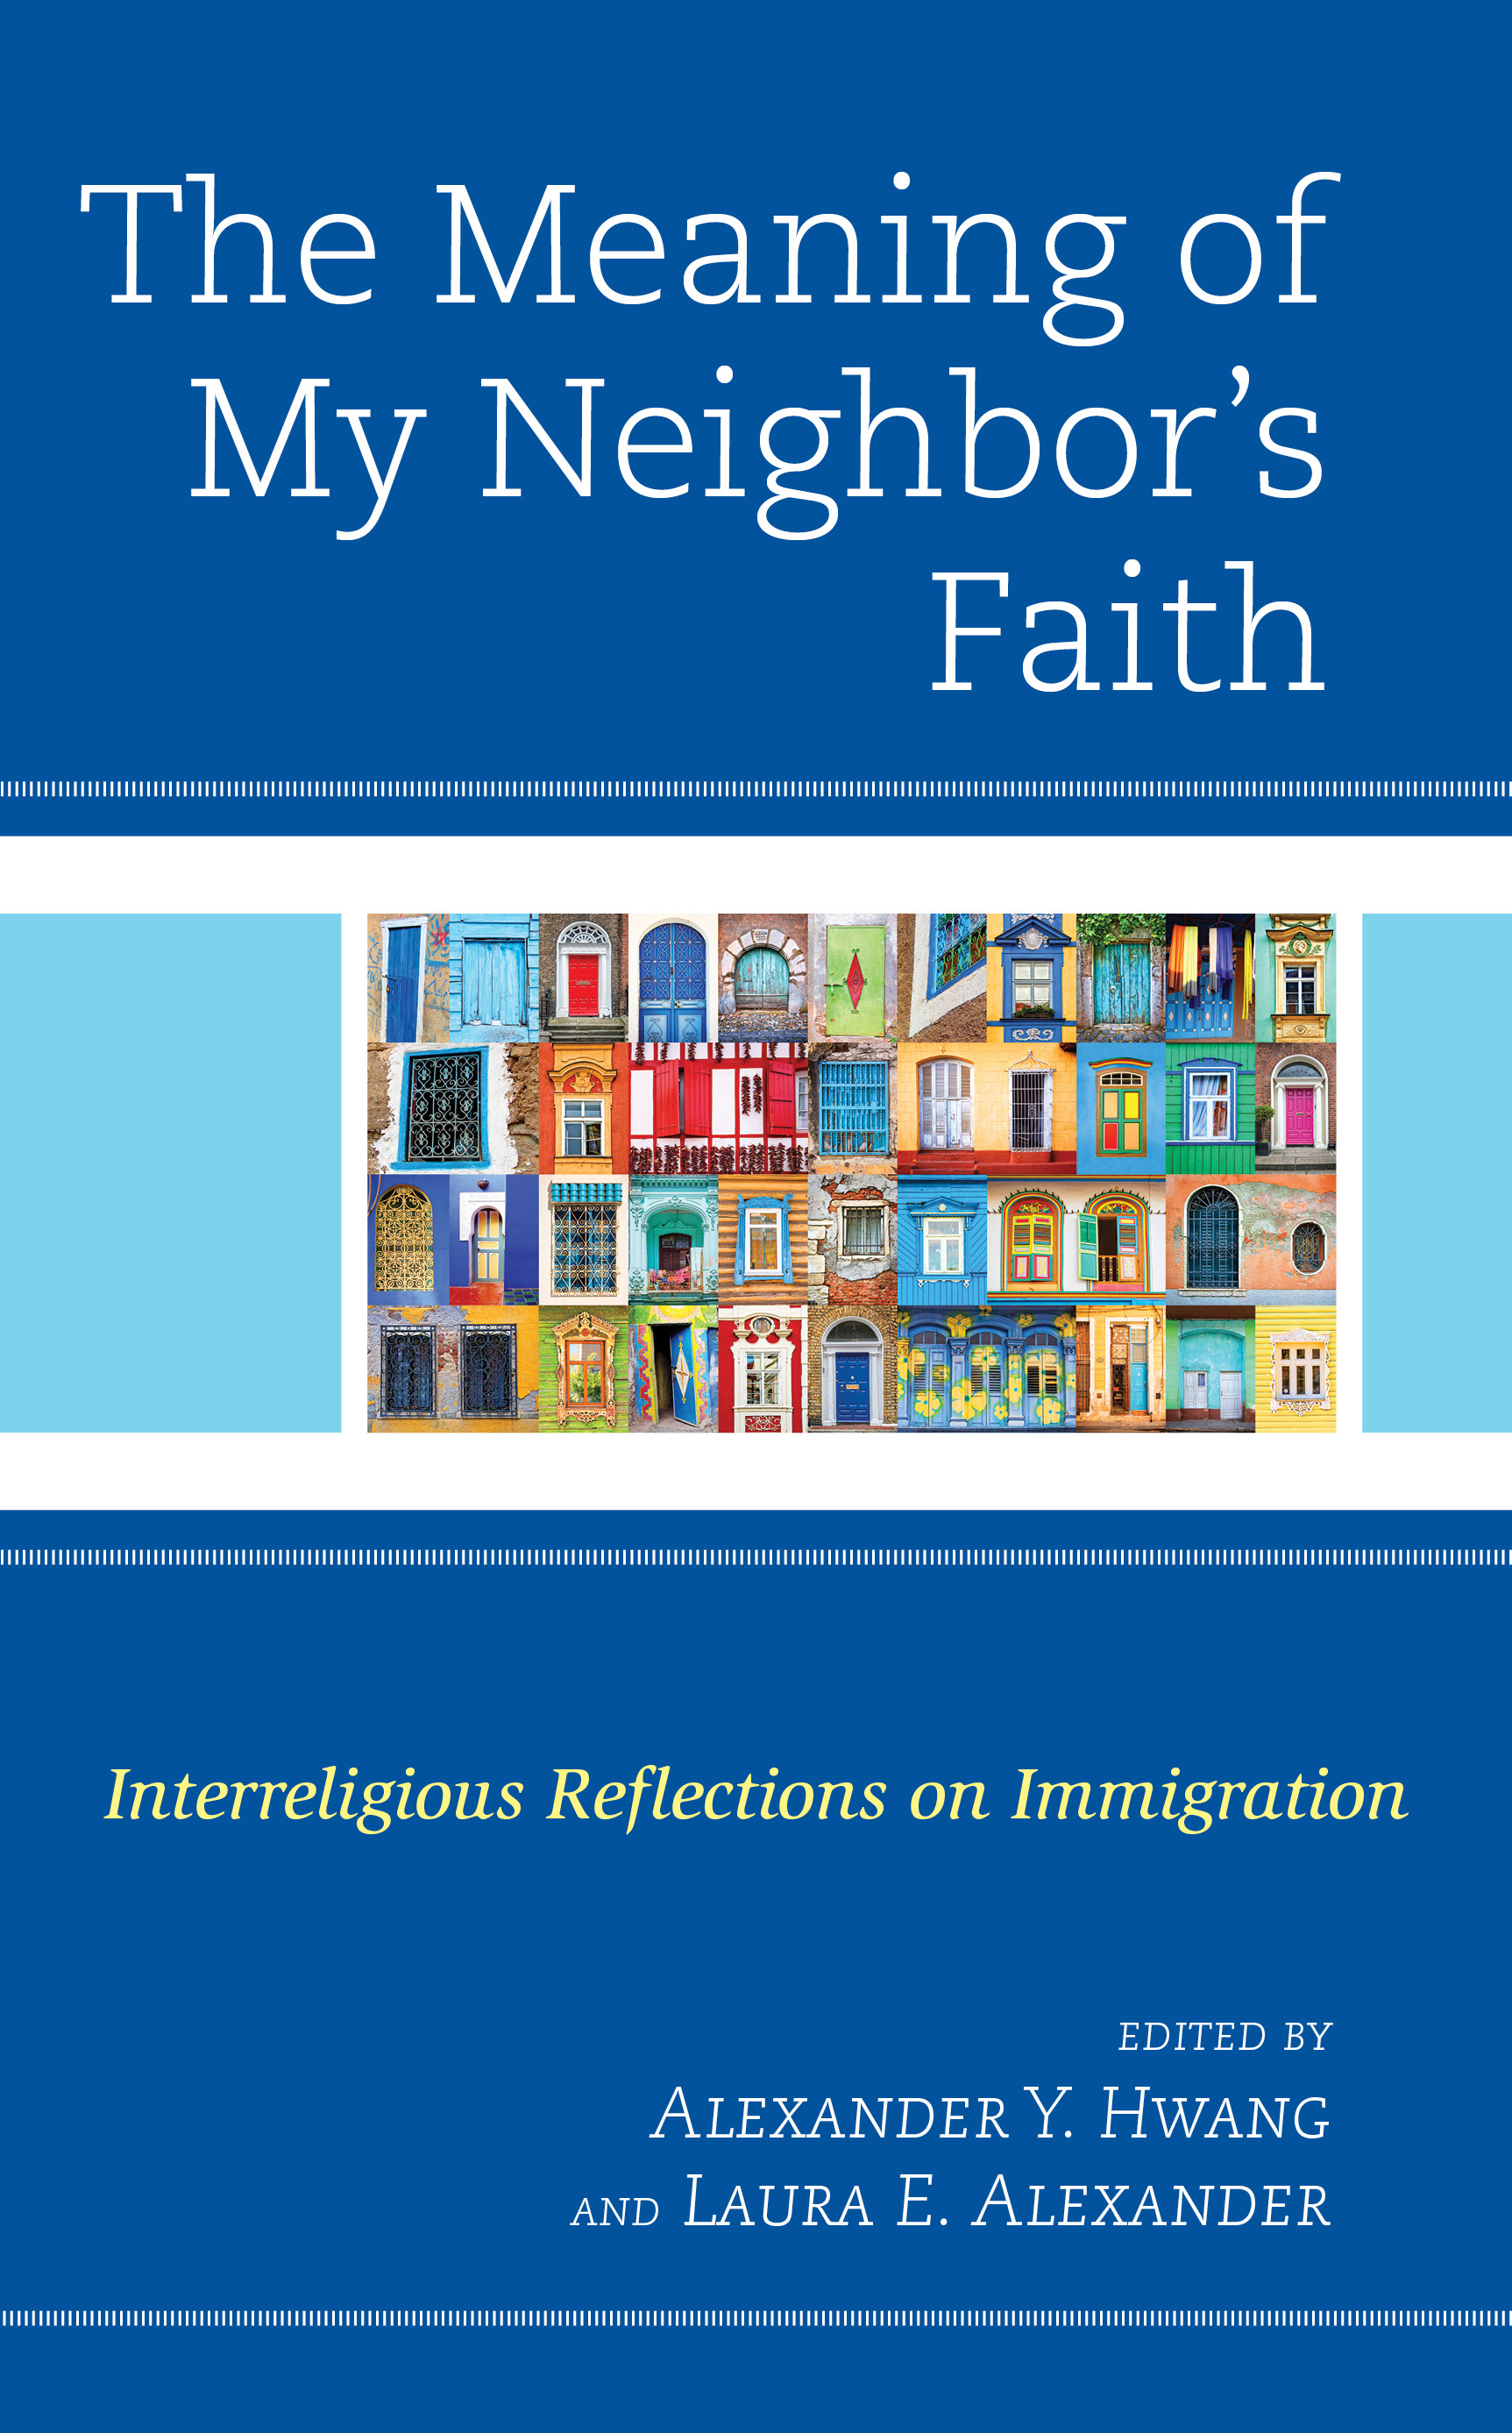 The Meaning of My Neighbor’s Faith: Interreligious Reflections on Immigration